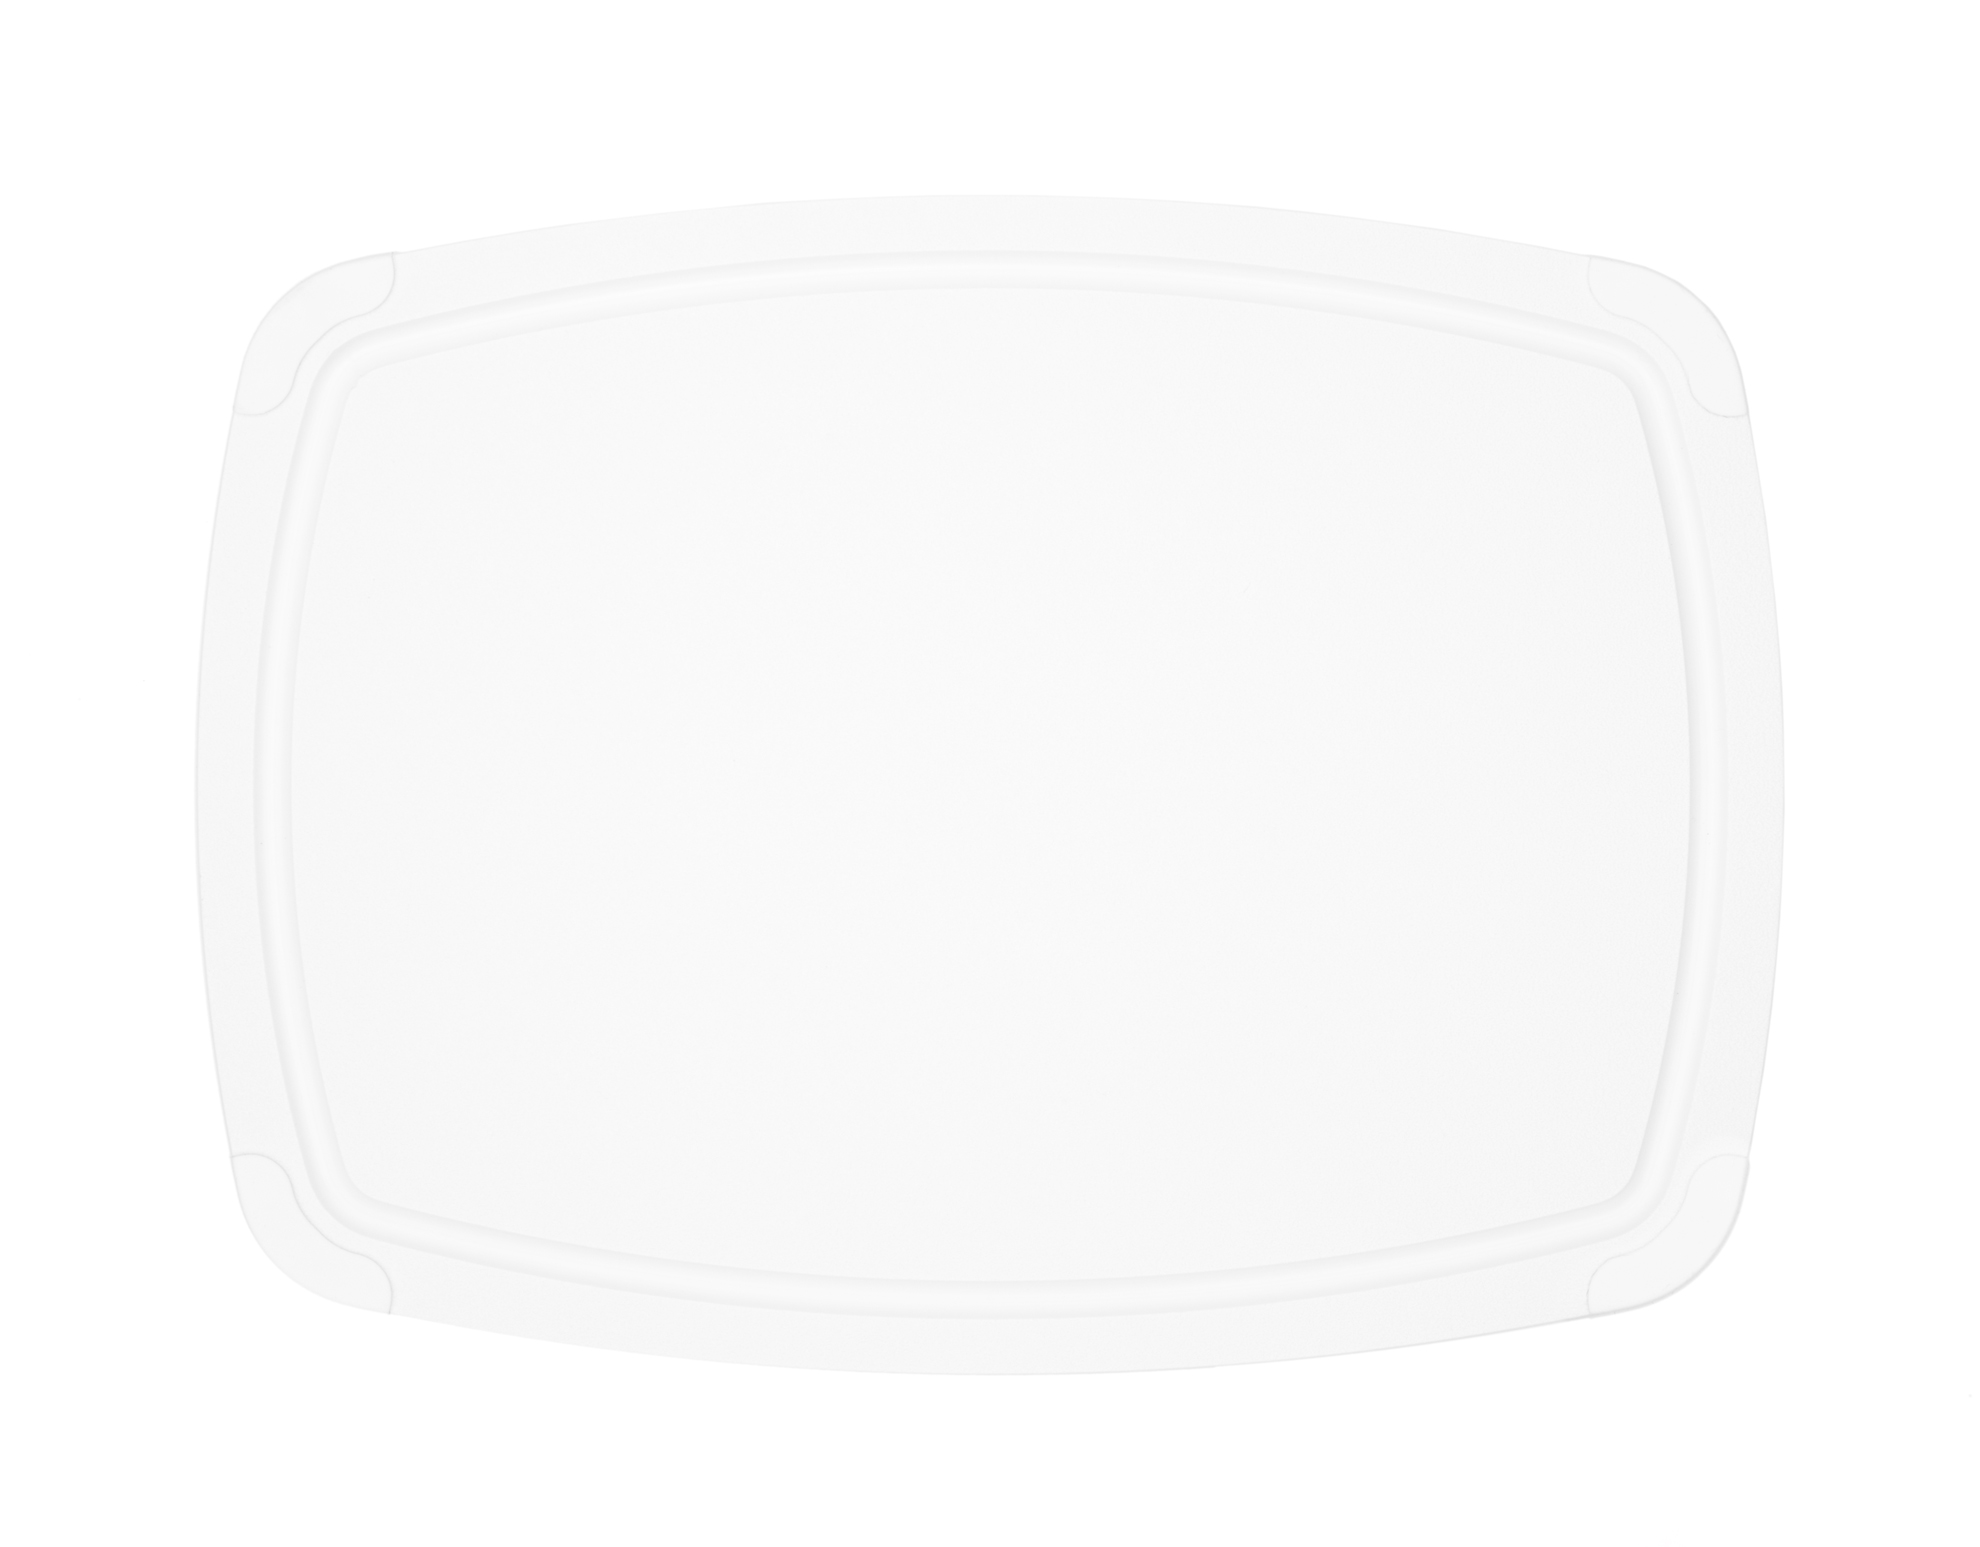 ecooks-MAIN-cutting board poly series-white-402307